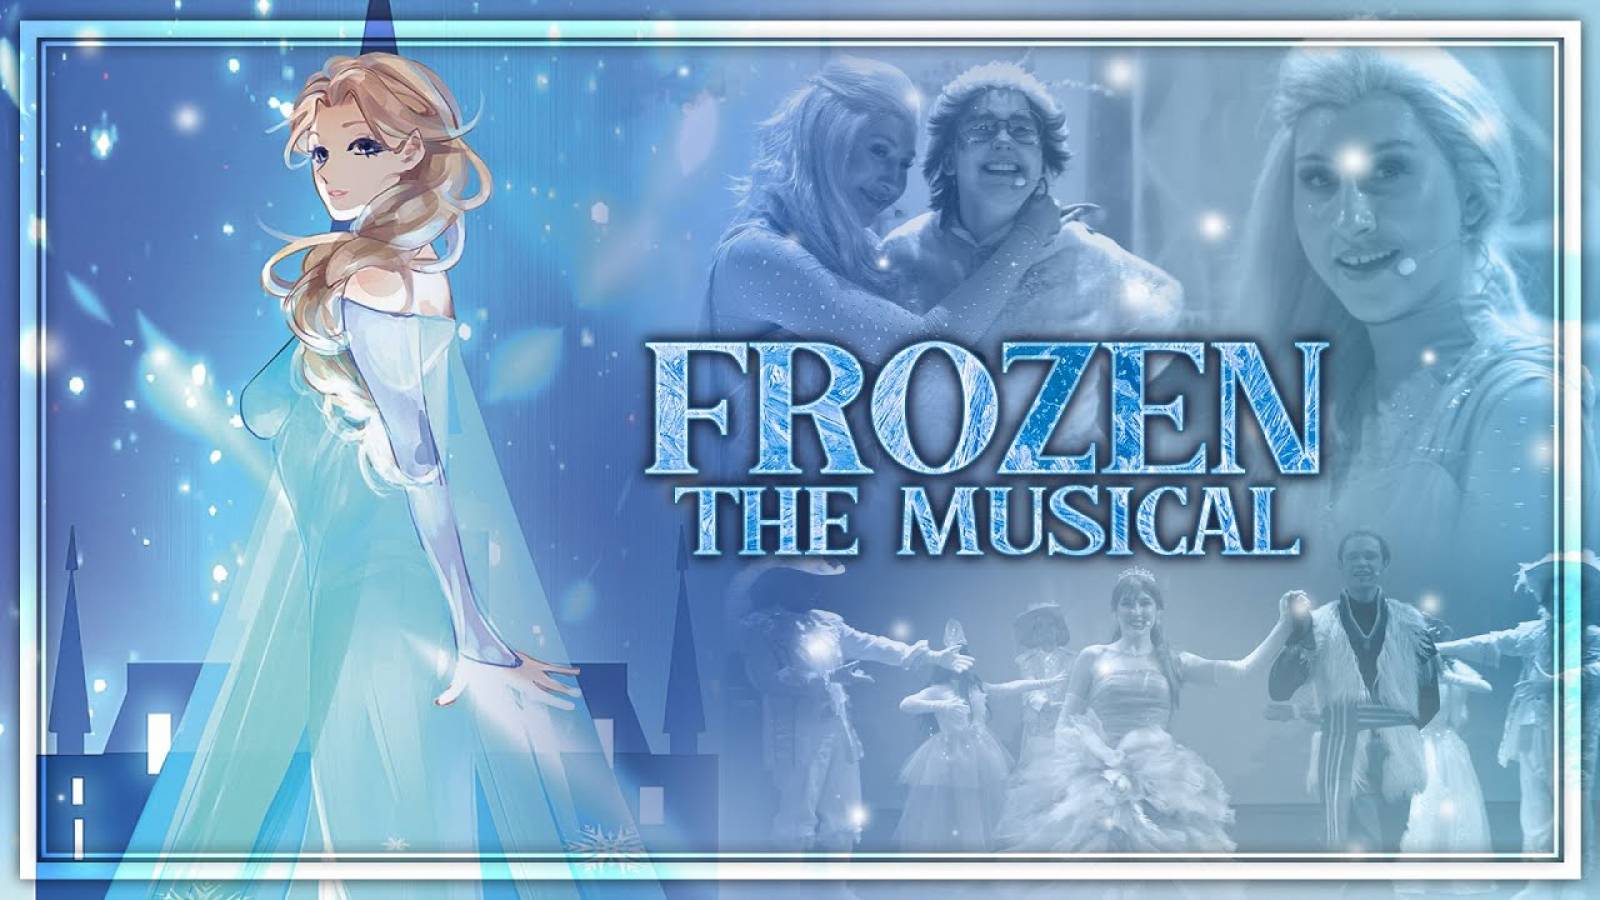 Frozen Celebration - Let Your Imagination Run Wild with The Perfect Family Entertainment!